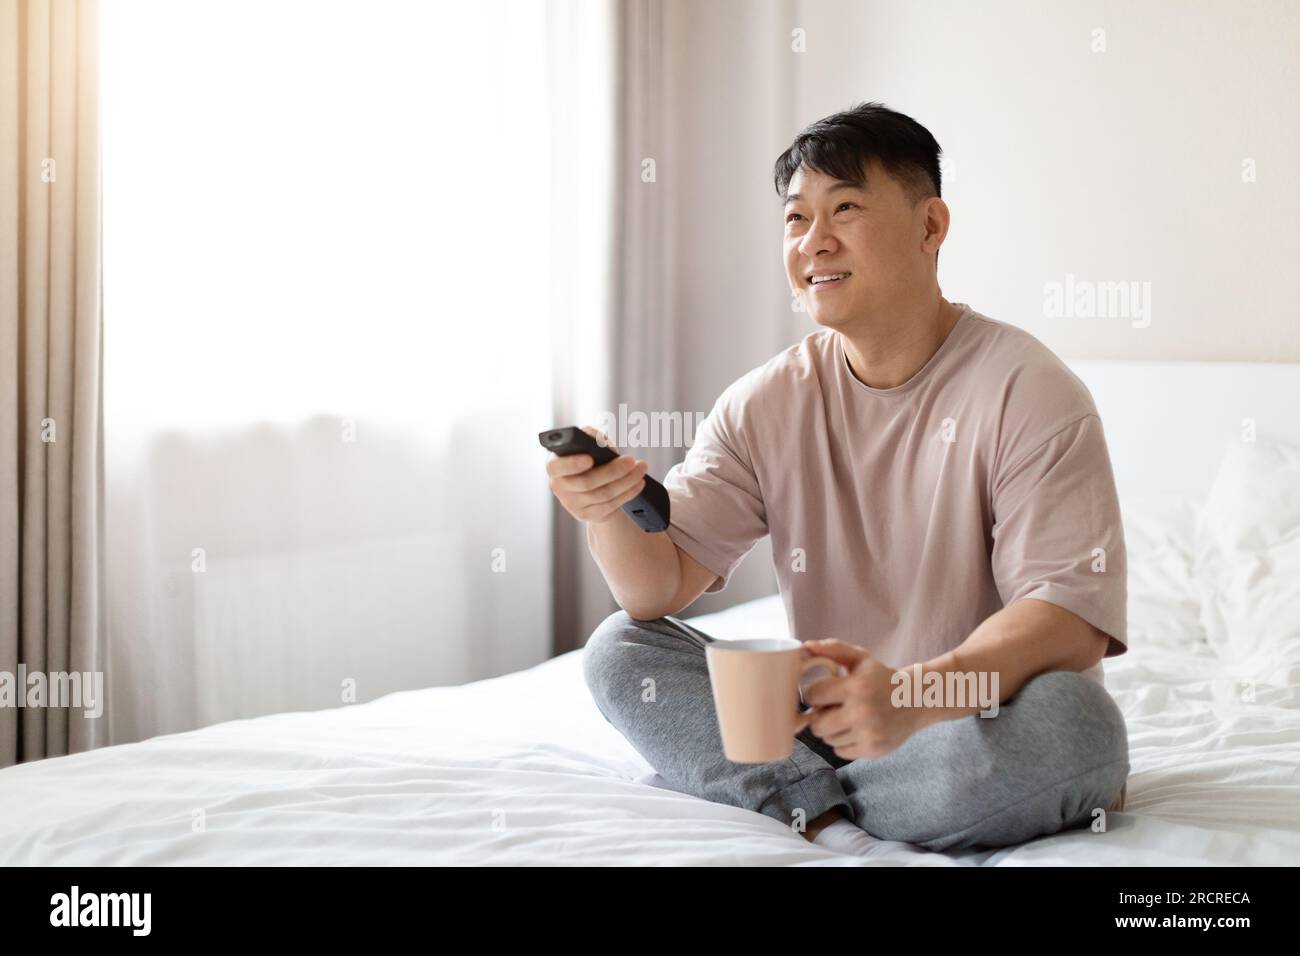 Happy middle aged asian man sitting on bed, watching TV Stock Photo